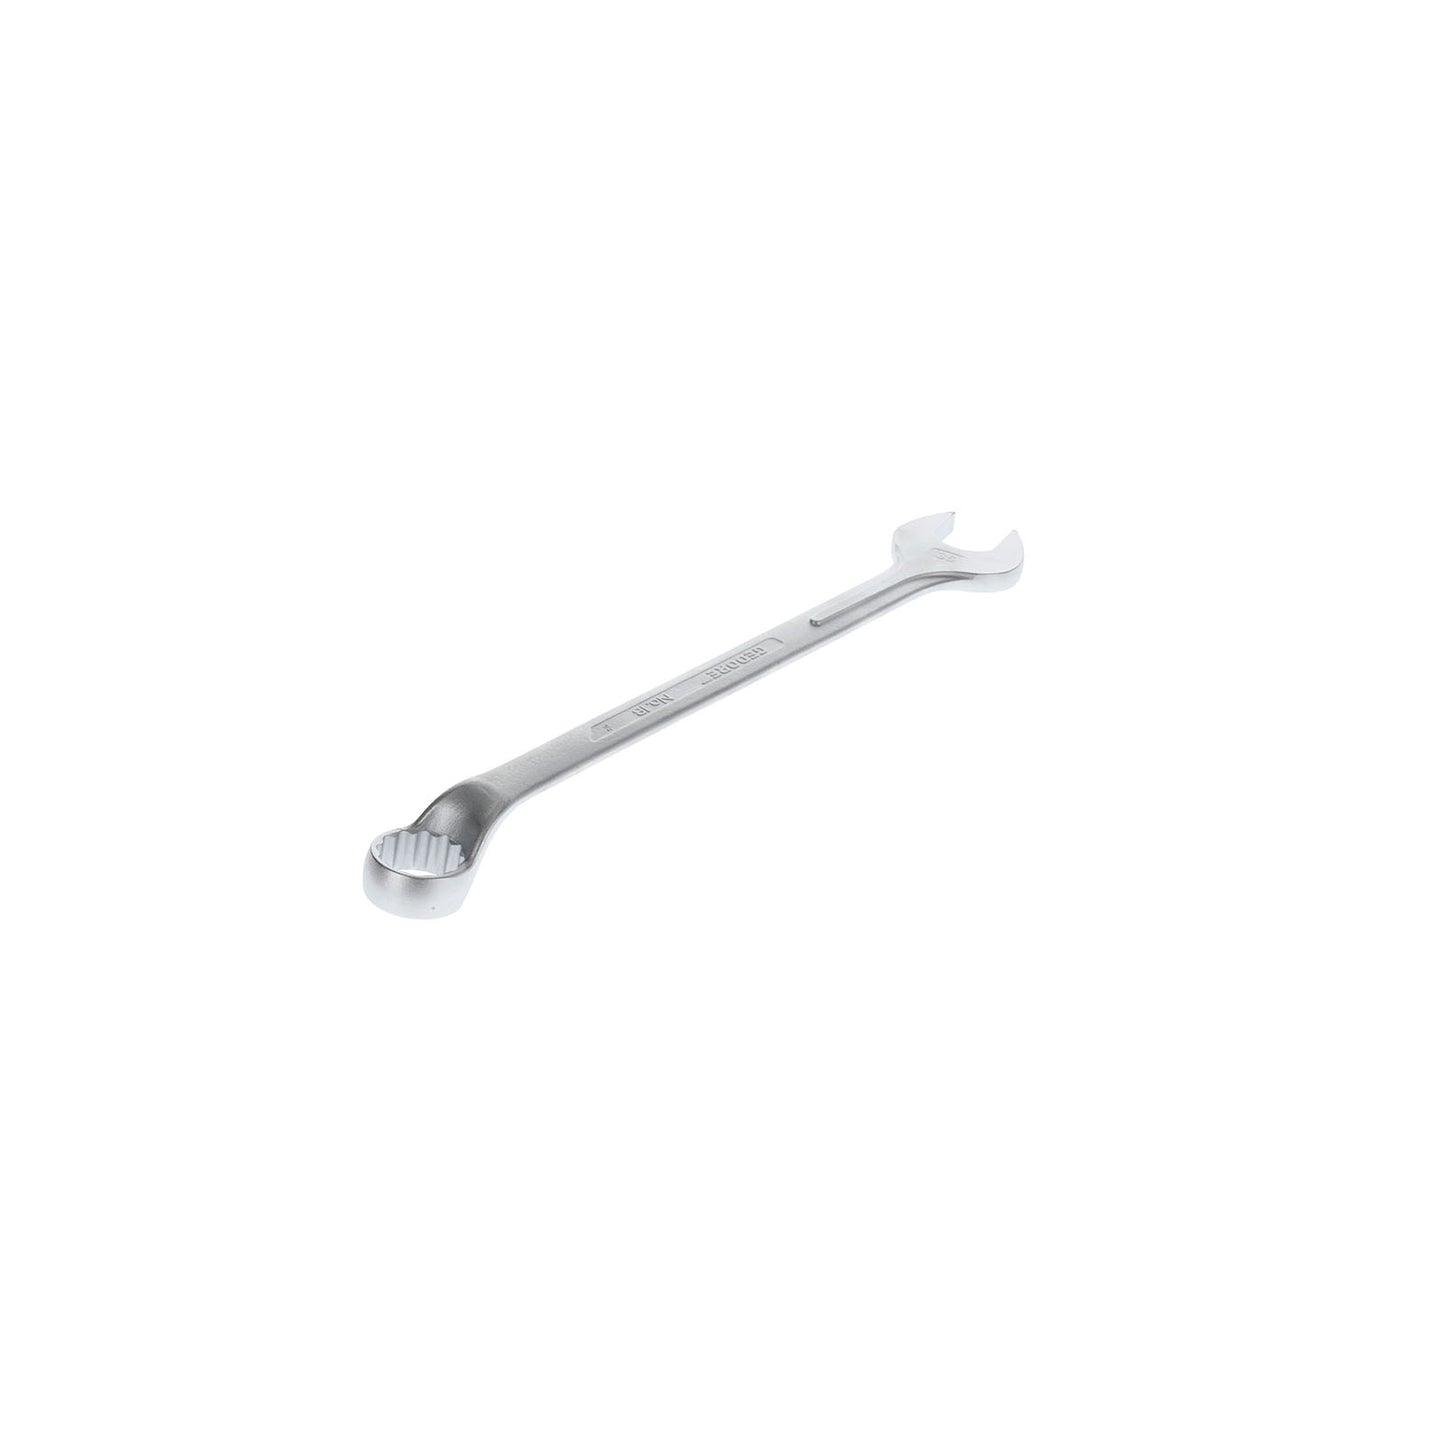 GEDORE 1 B 36 - Offset Combination Wrench, 36mm (6003420)